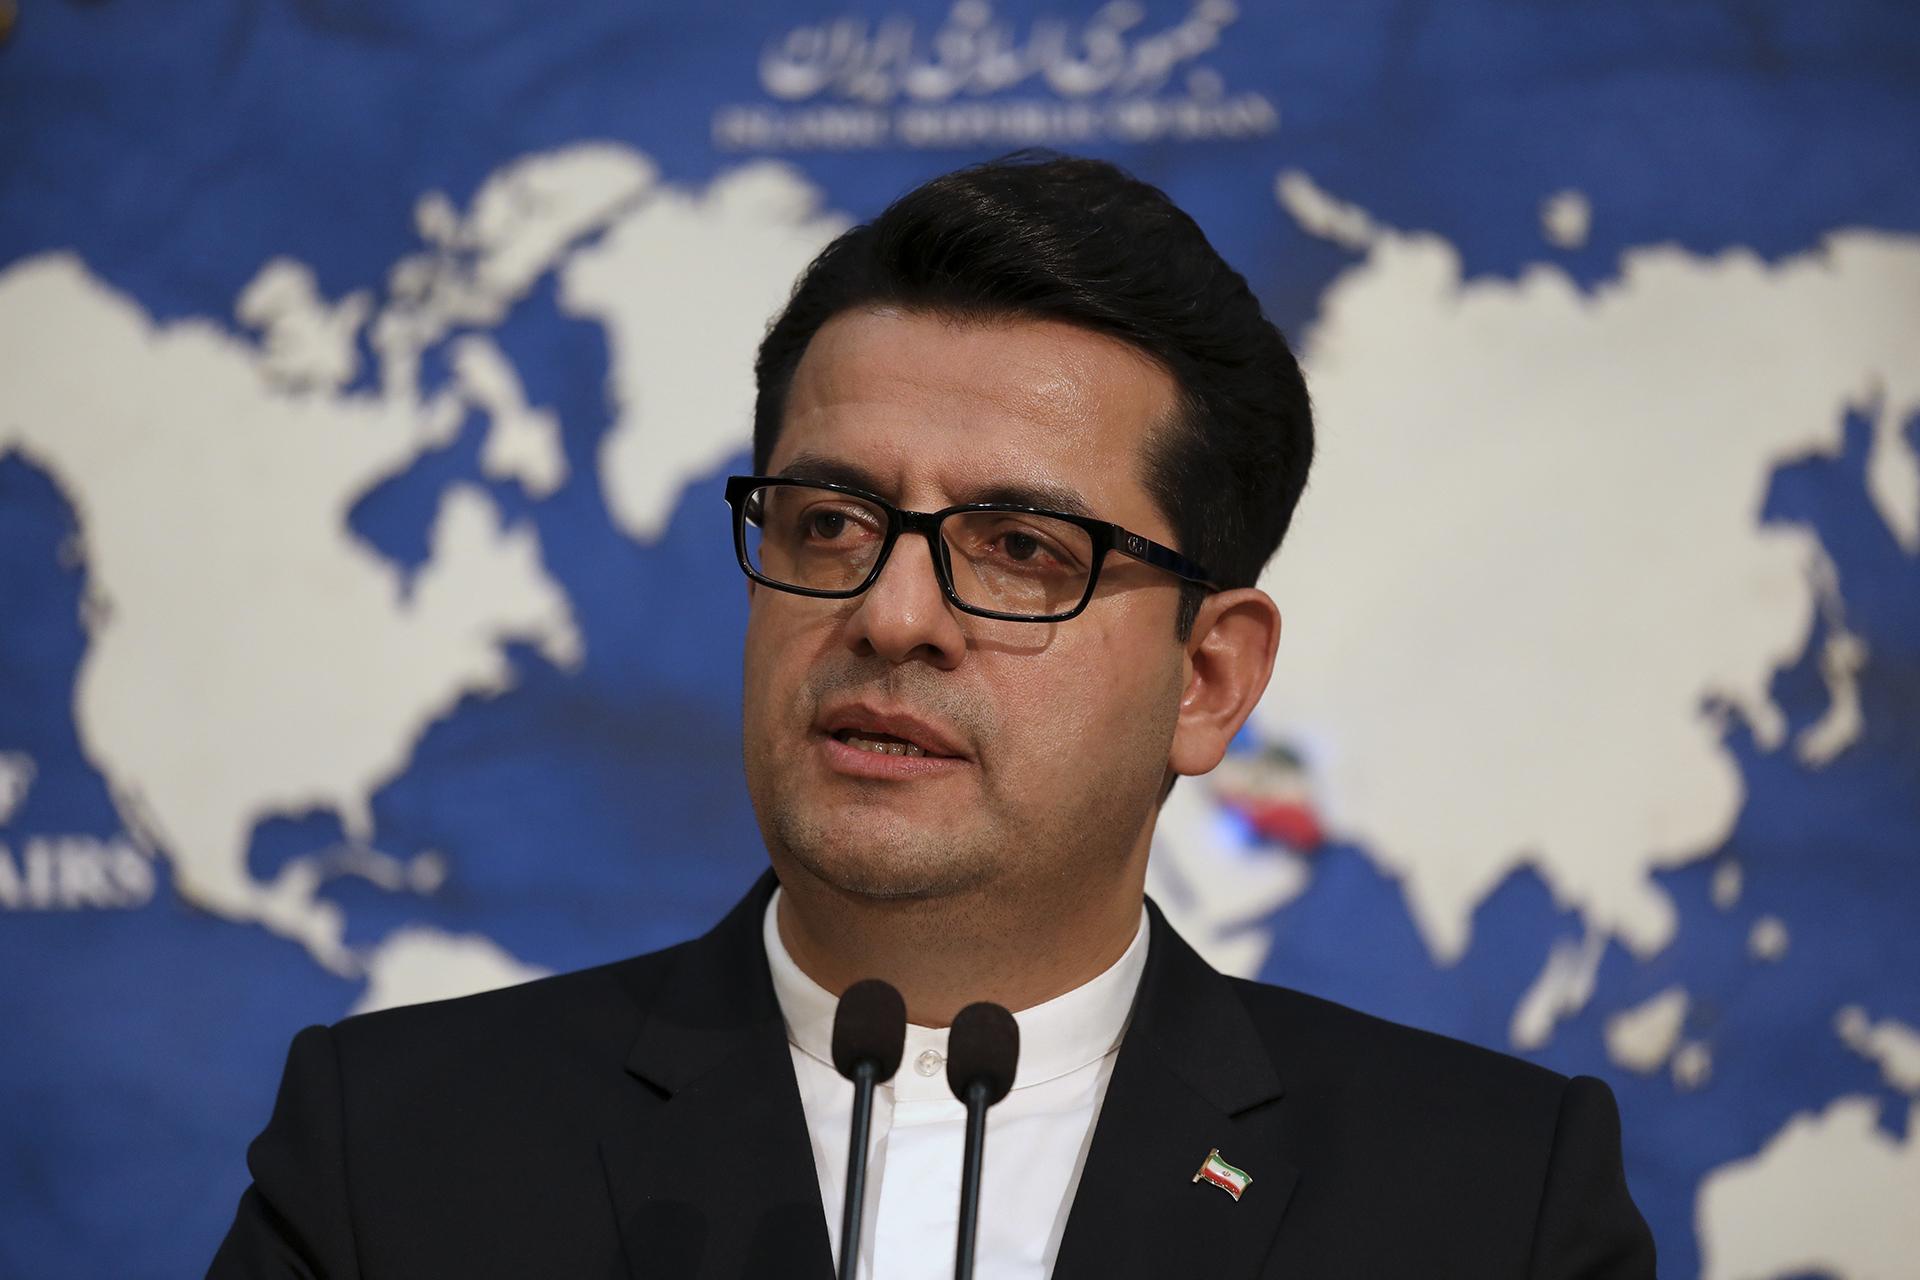 In this May 28, 2019 photo, Iran’s Foreign Ministry spokesman Abbas Mousavi speaks at a press conference in Tehran, Iran. (AP Photo / Vahid Salemi)